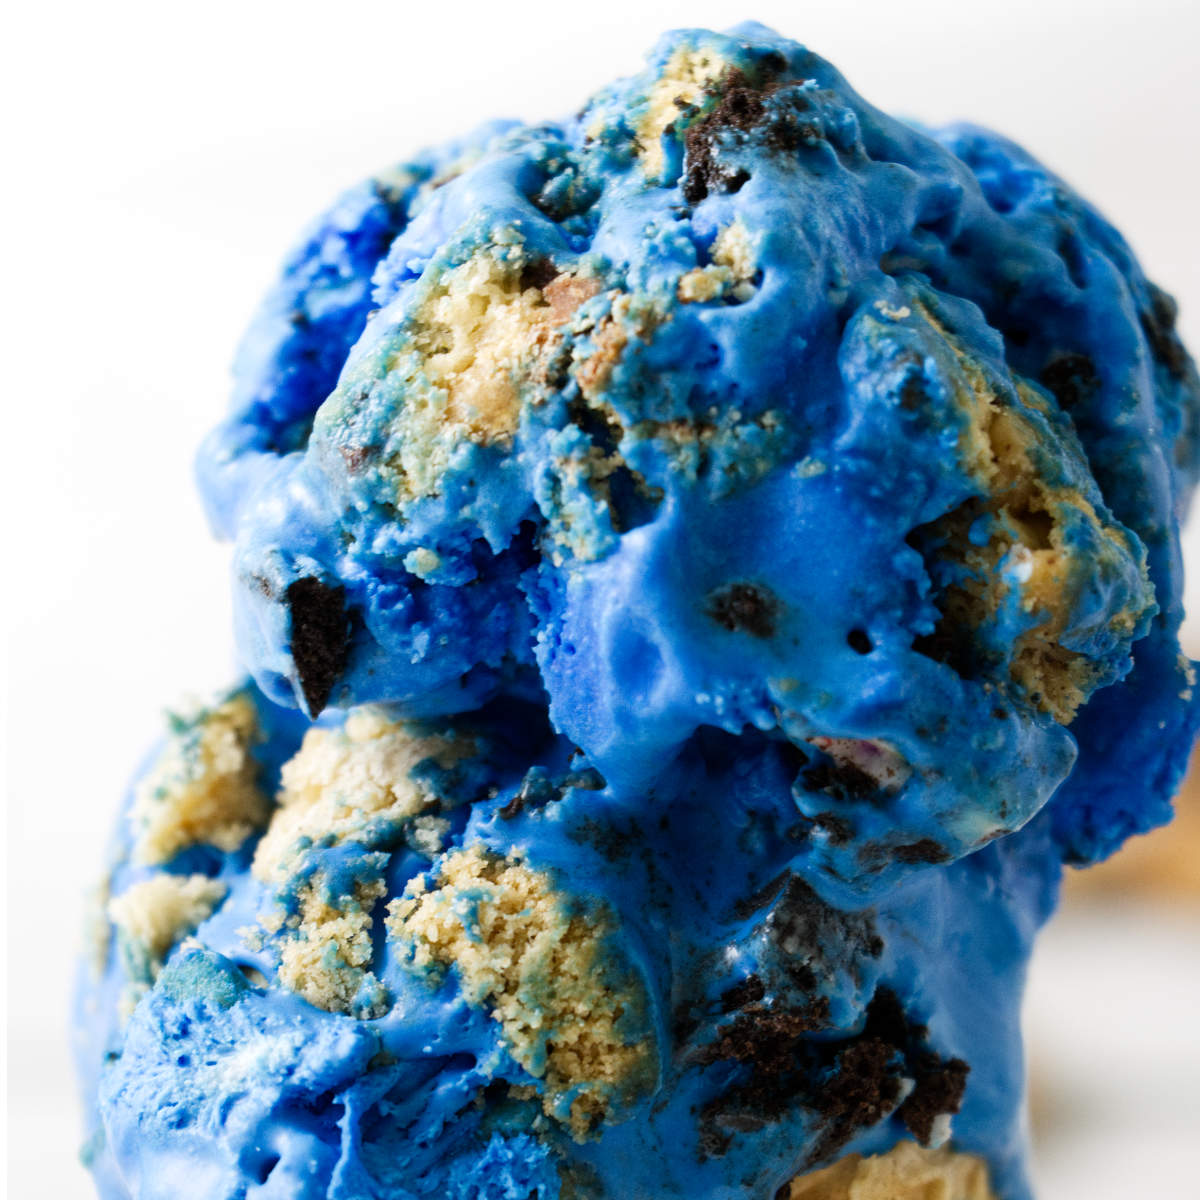 Chunks of cookies blended into blue ice cream.